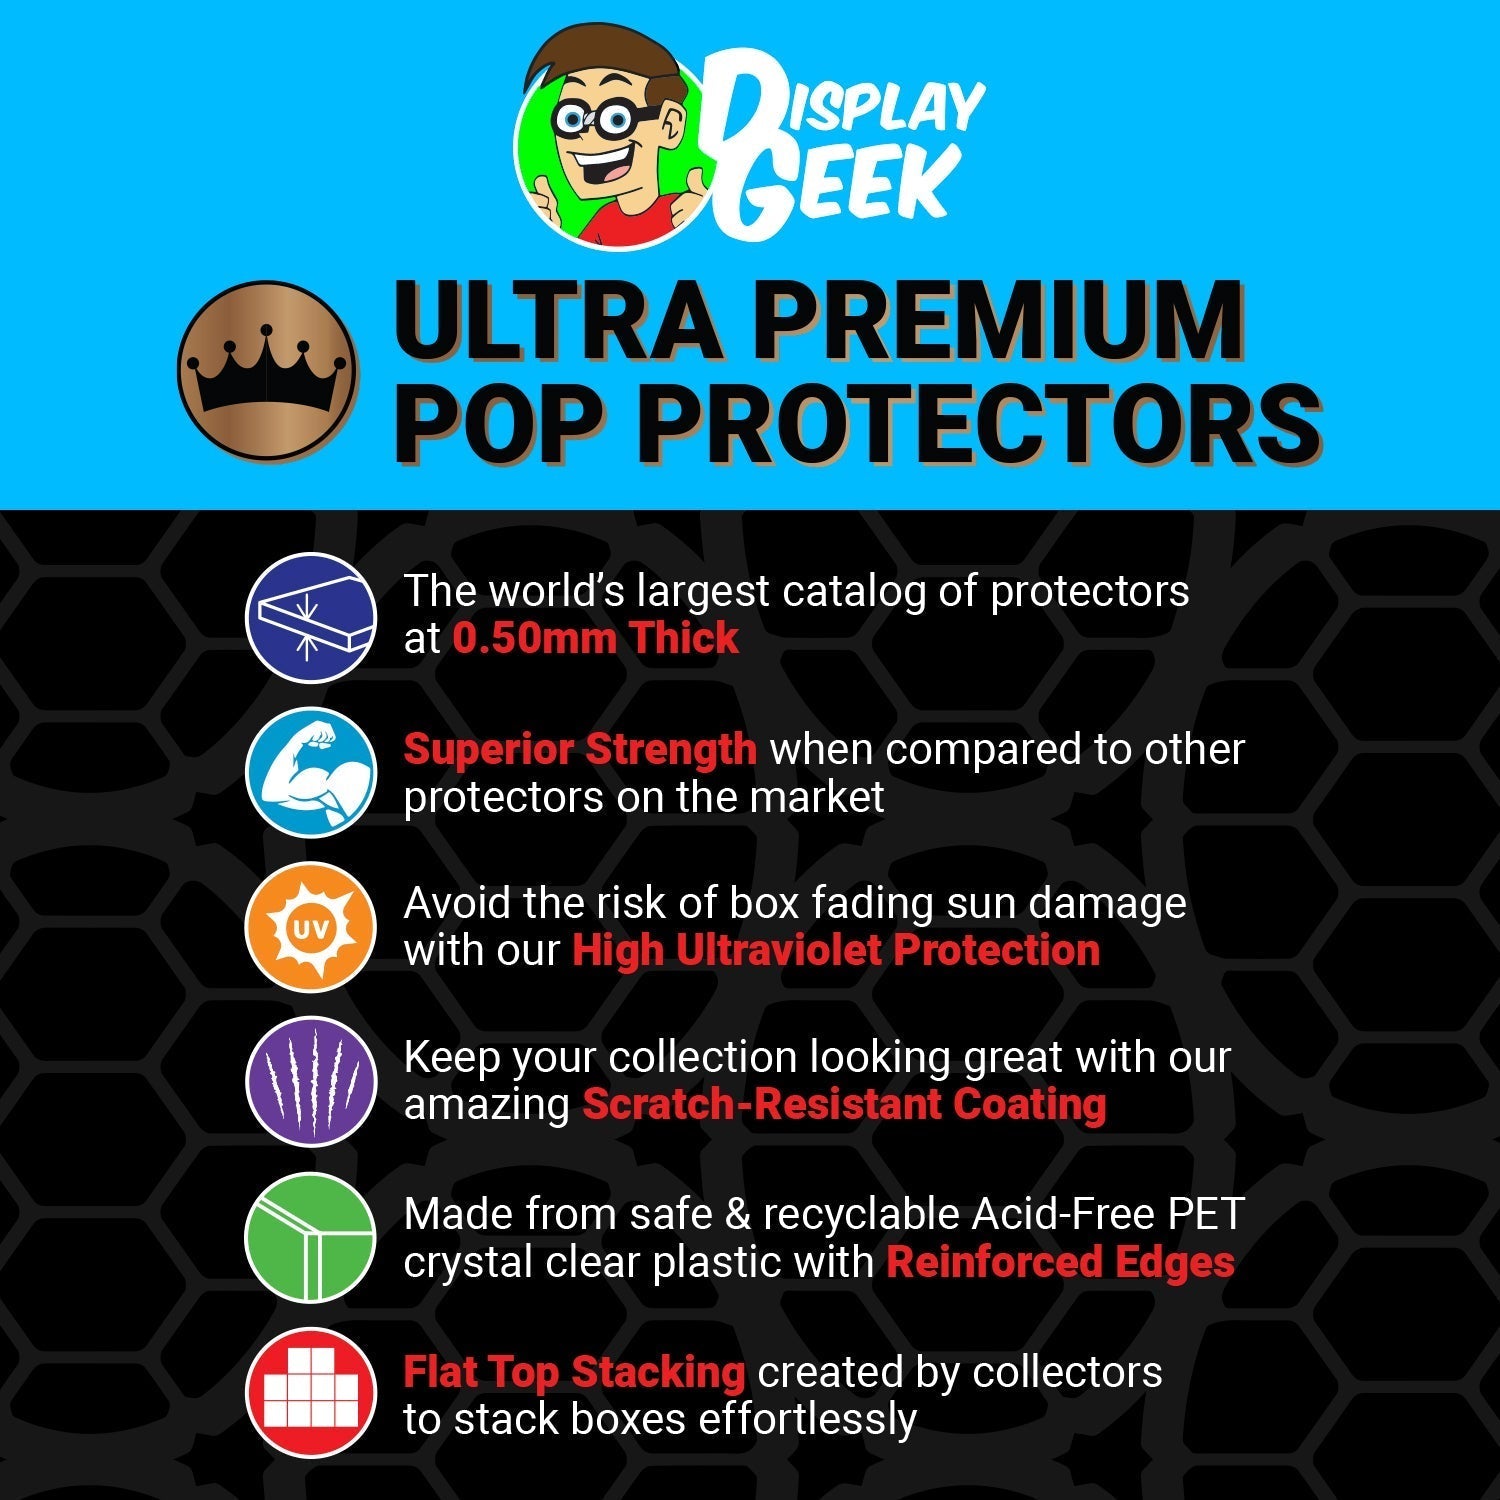 Pop Protector for Cinderella Castle and Mickey Mouse #26 Funko Pop Town - PPG Pop Protector Guide Search Created by Display Geek